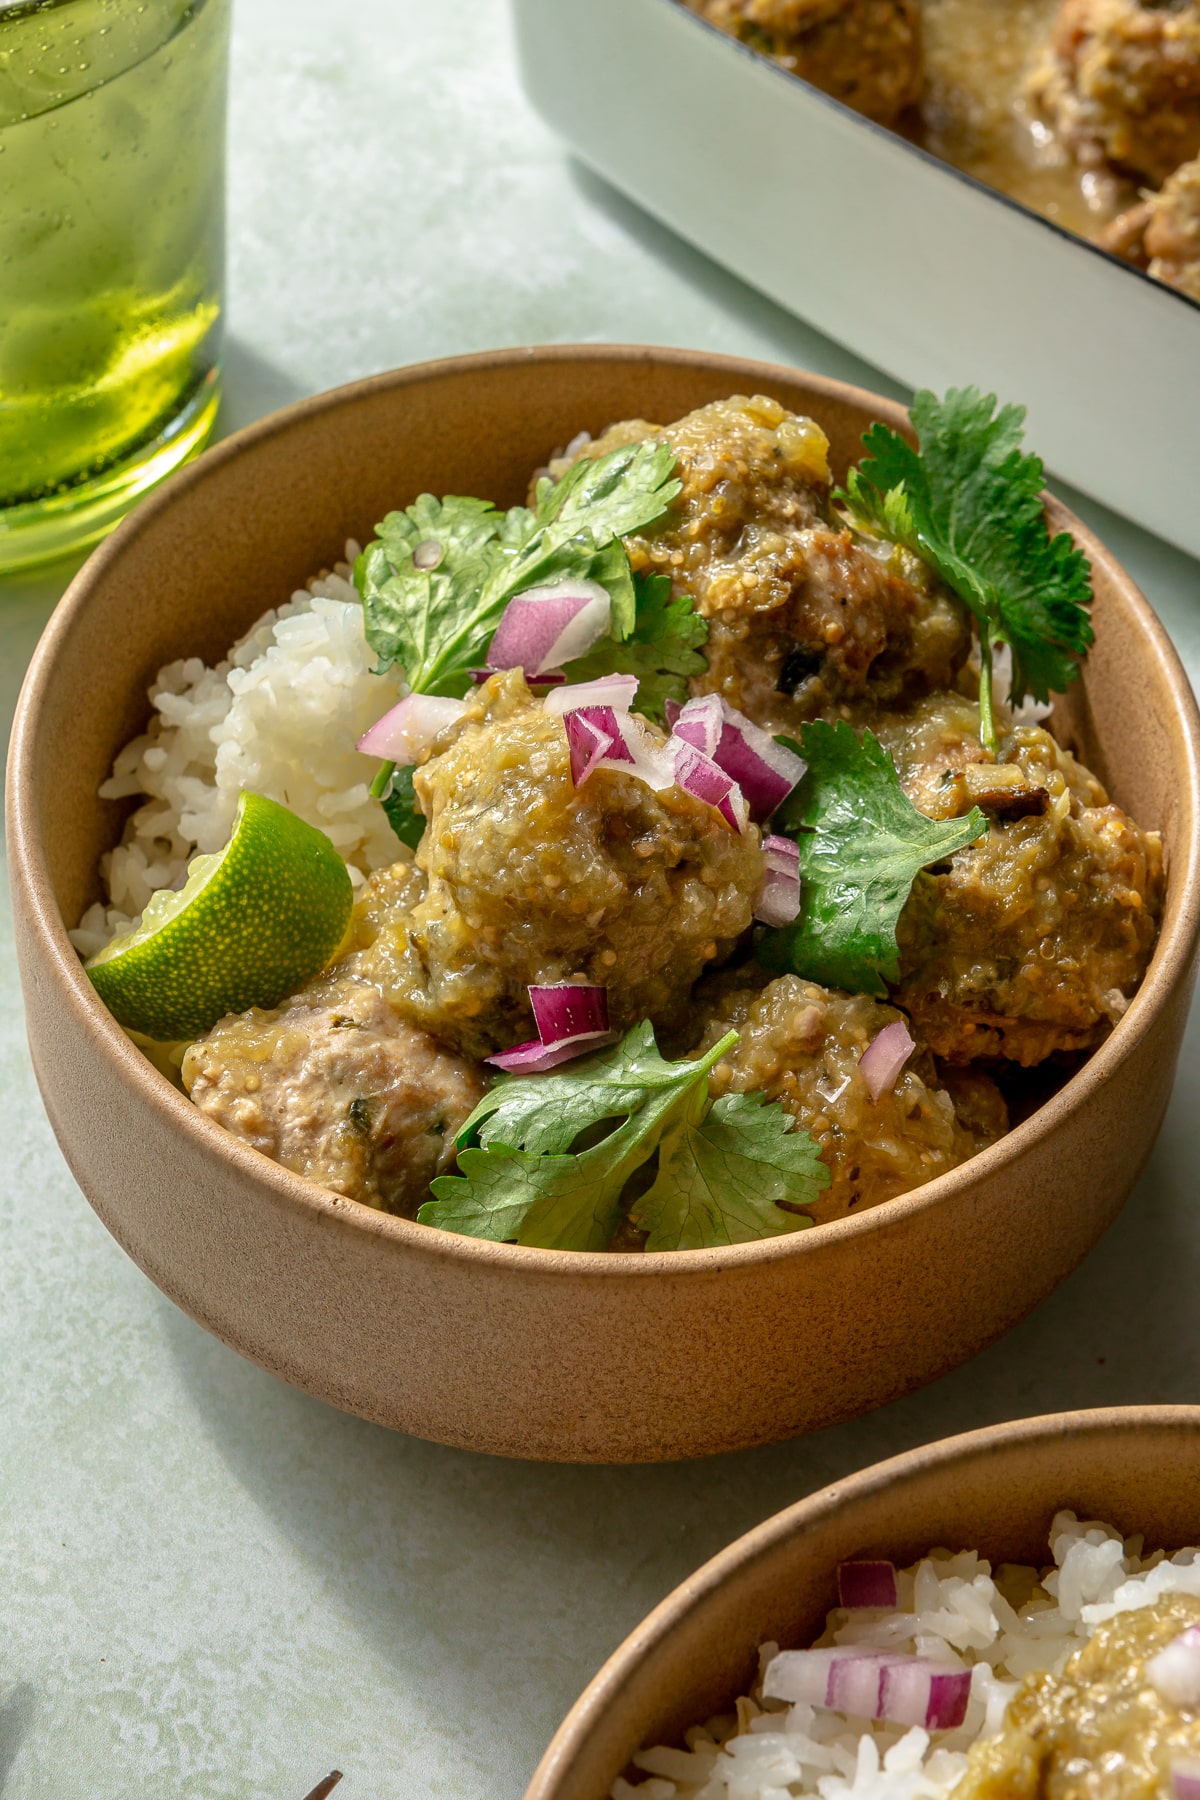 Enchilada verde turkey meatballs have been served in two bowls over white rice. Diced onions and cilantro have been placed on top for garnish.